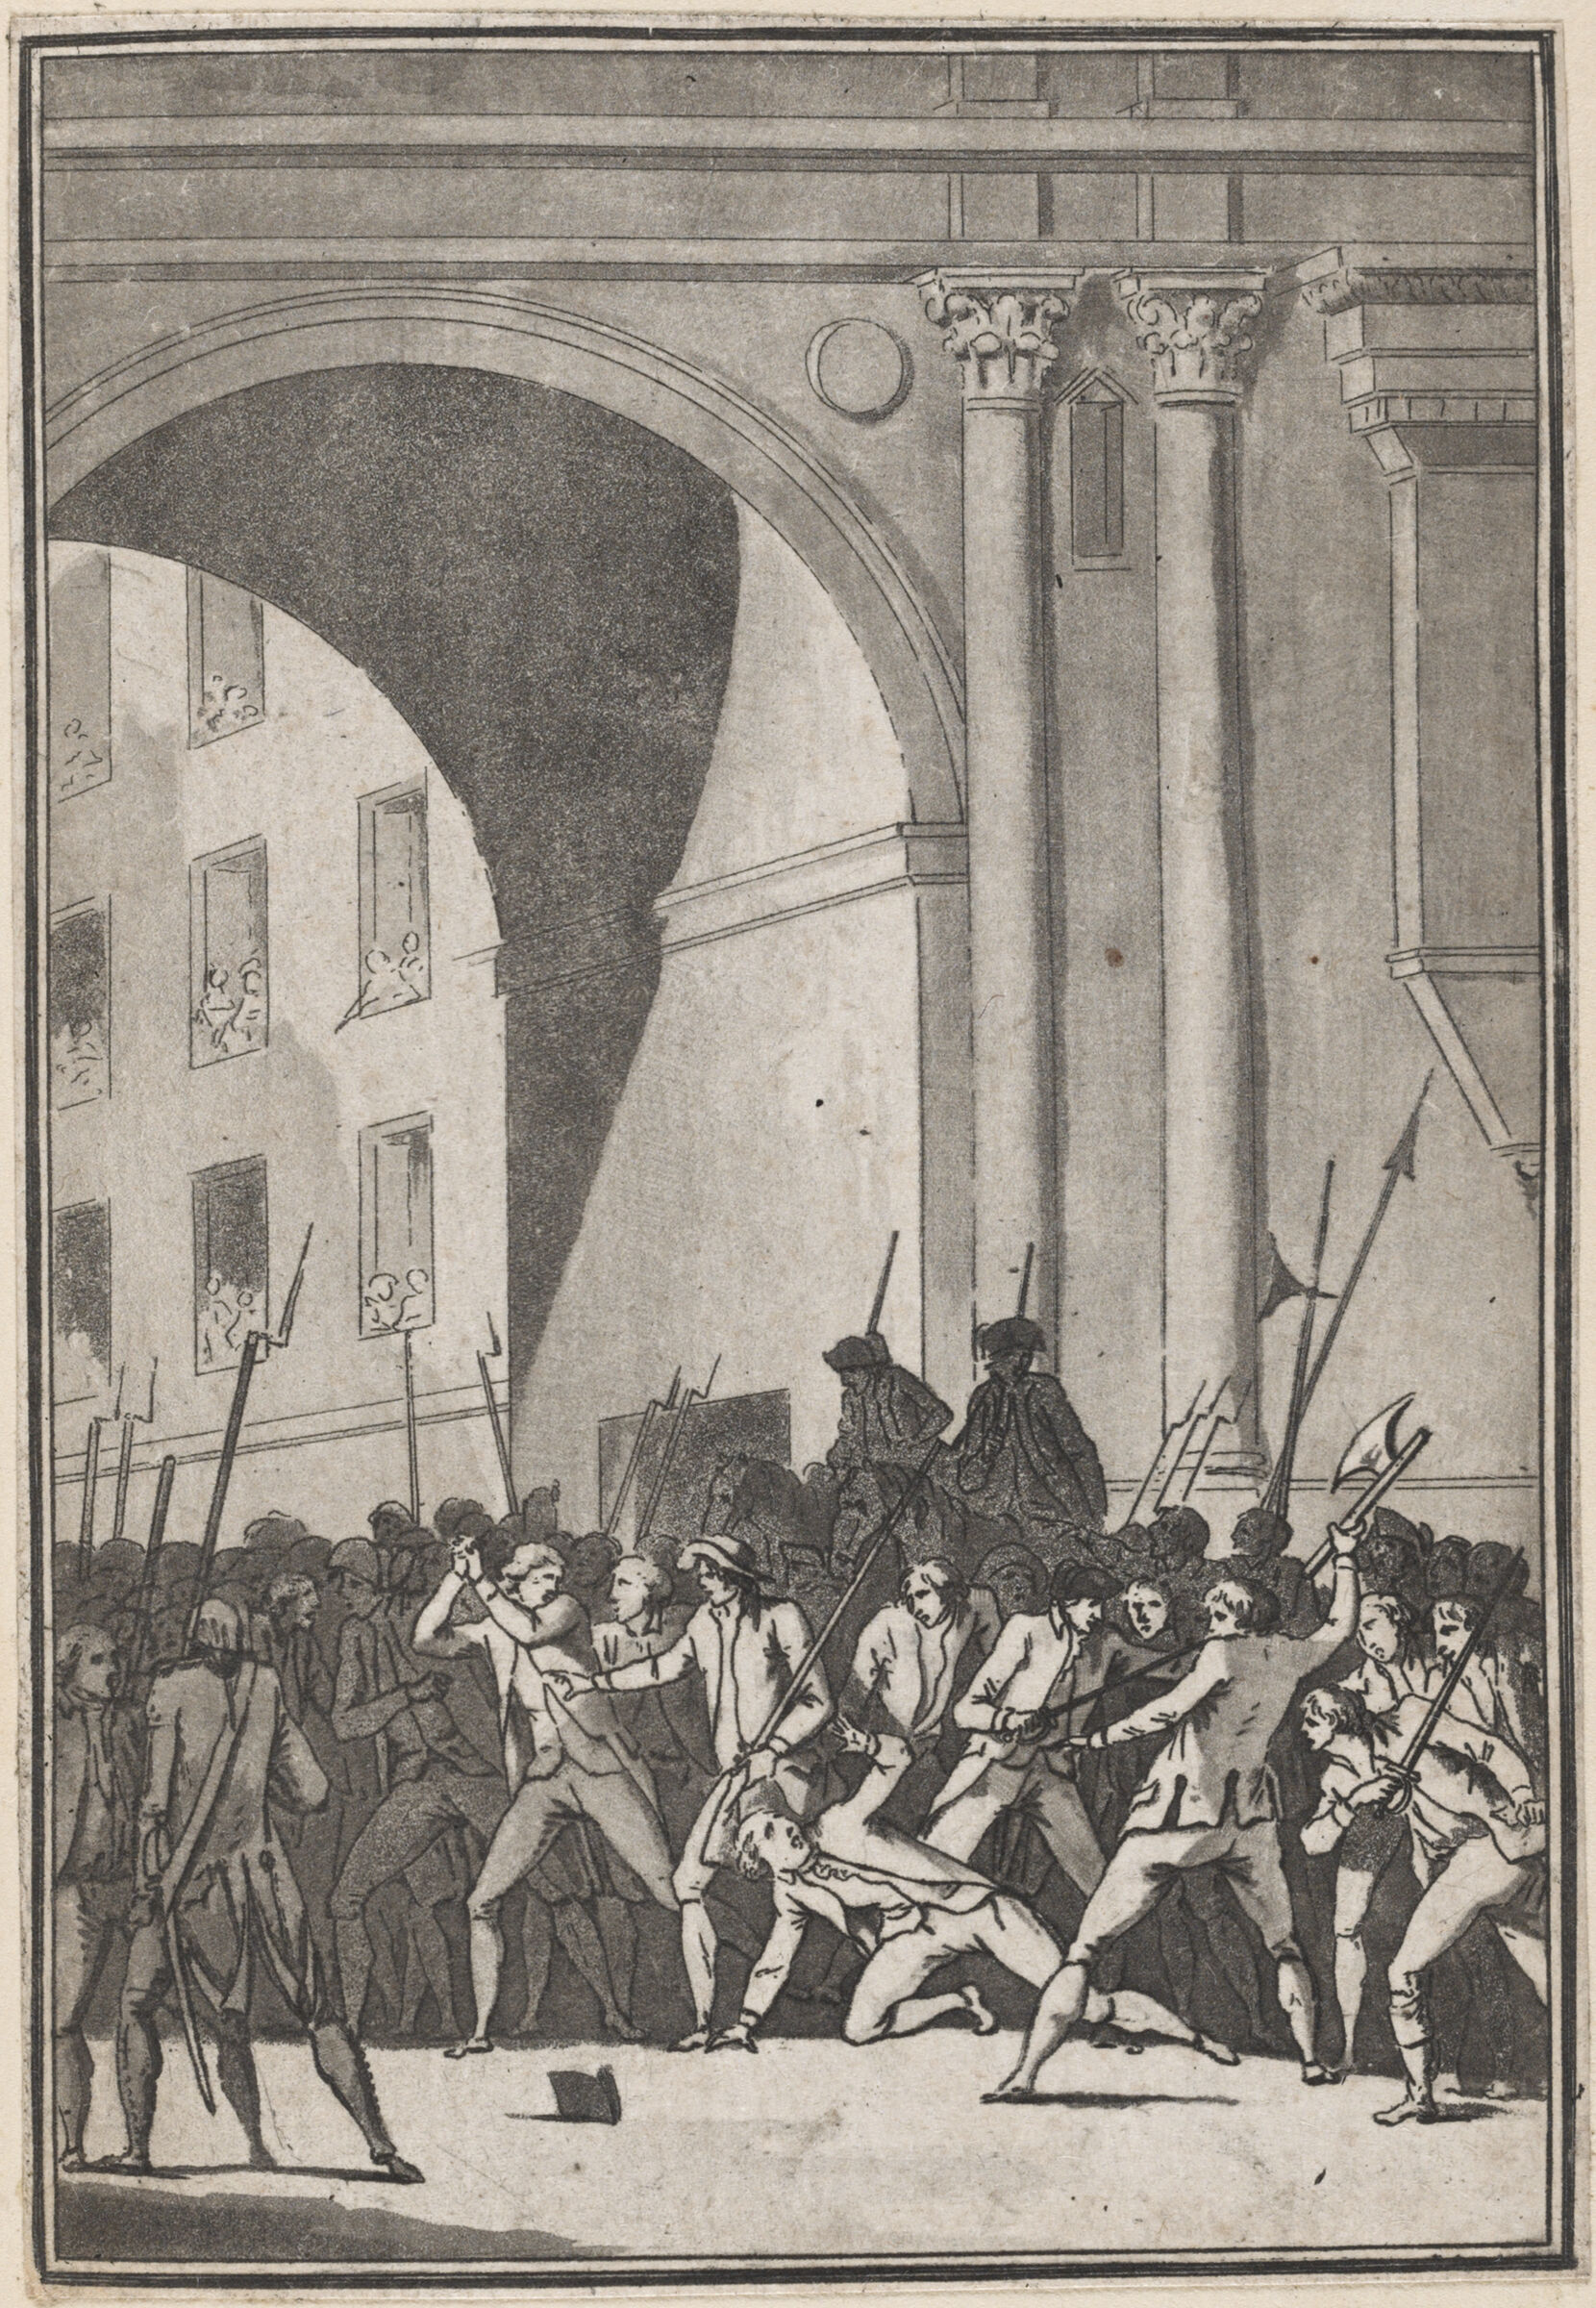 The Marquis De Pellepont, Wanting To Wrest The Major Of The Bastille From The Hands Of The People, Is Himself Close To Being Killed By The Hatchet Blows Of A Relentless Man (14 July 1789)